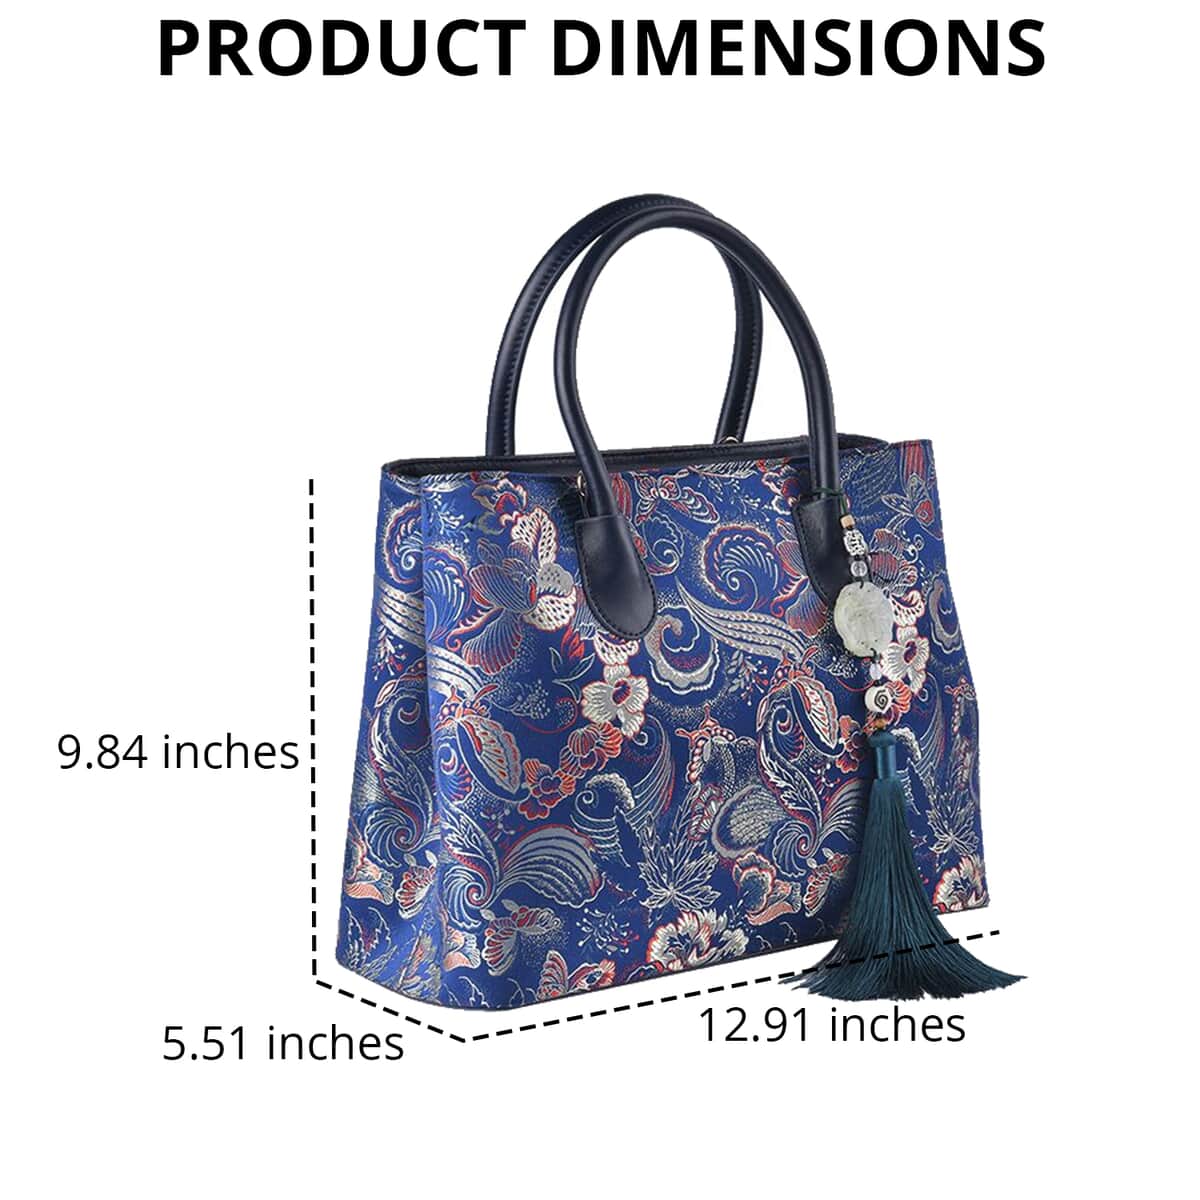 Navy Phoenix tail Flower Pattern Brocade with Genuine Leather Crossbody Bag (12.91"x9.84"x5.51") with Shoulder Strap image number 3